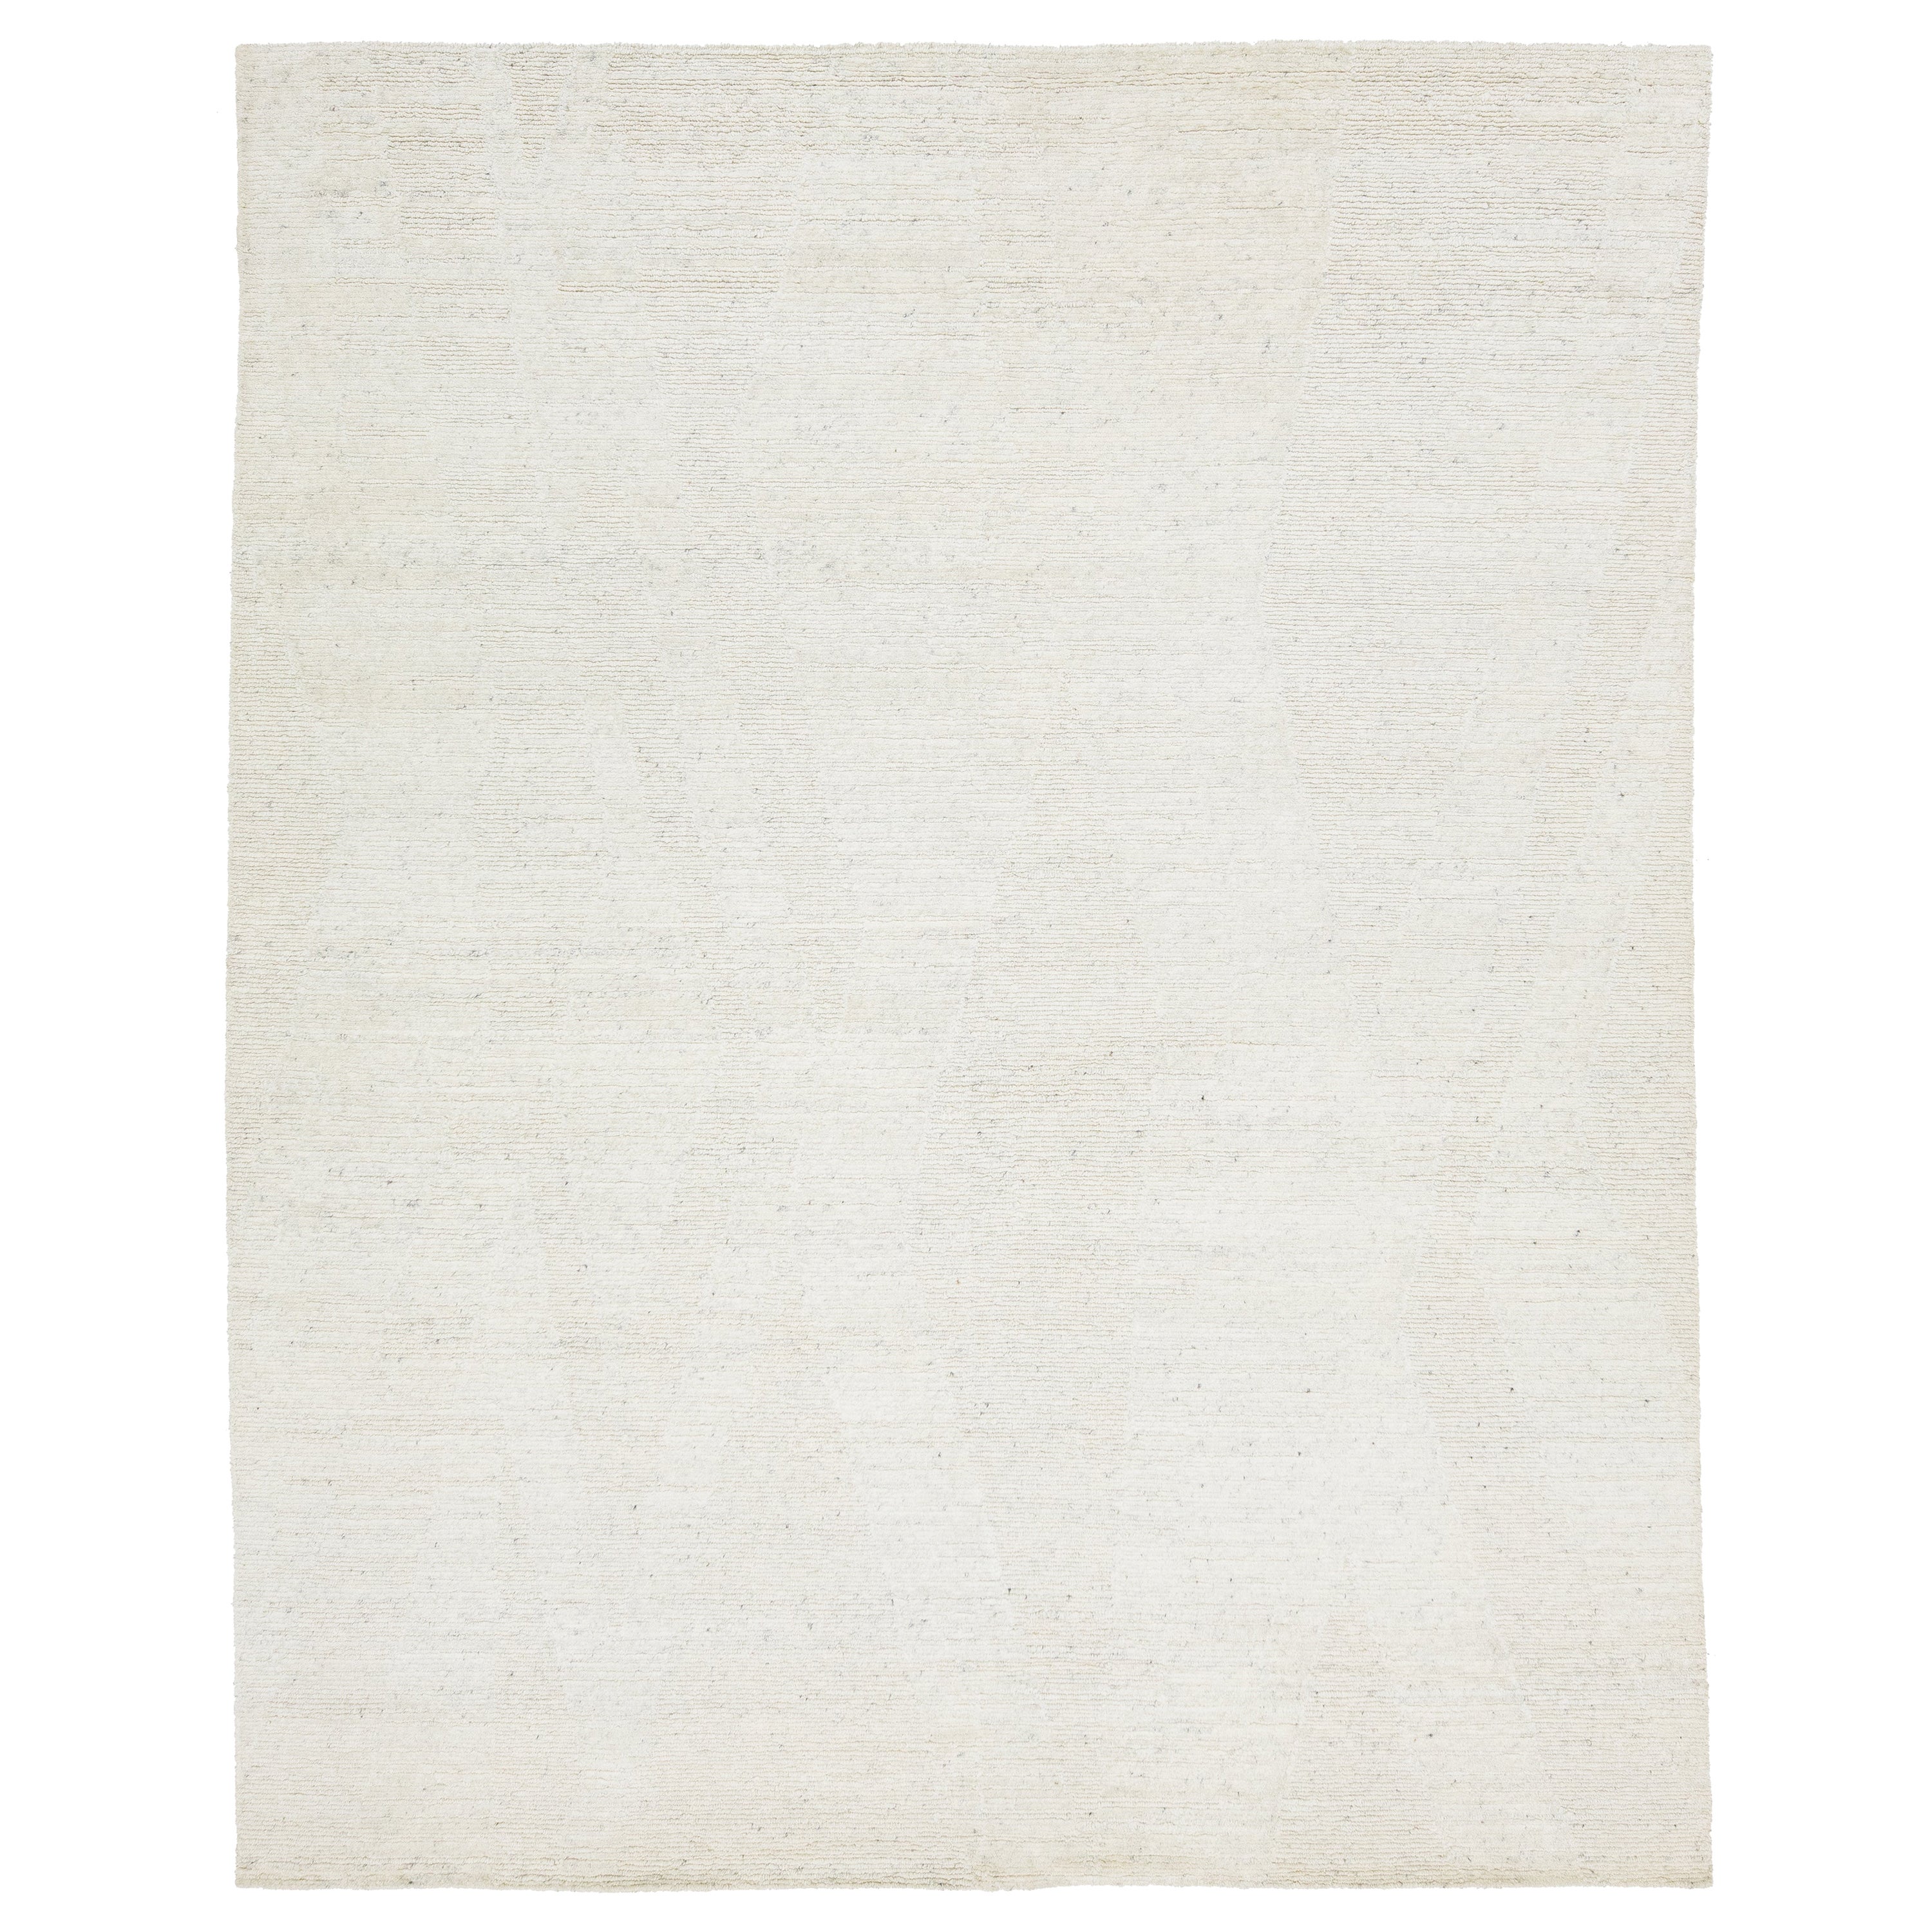 Apadana's Modern Moroccan Style Wool Rug In Ivory Features a Minimalist Design For Sale